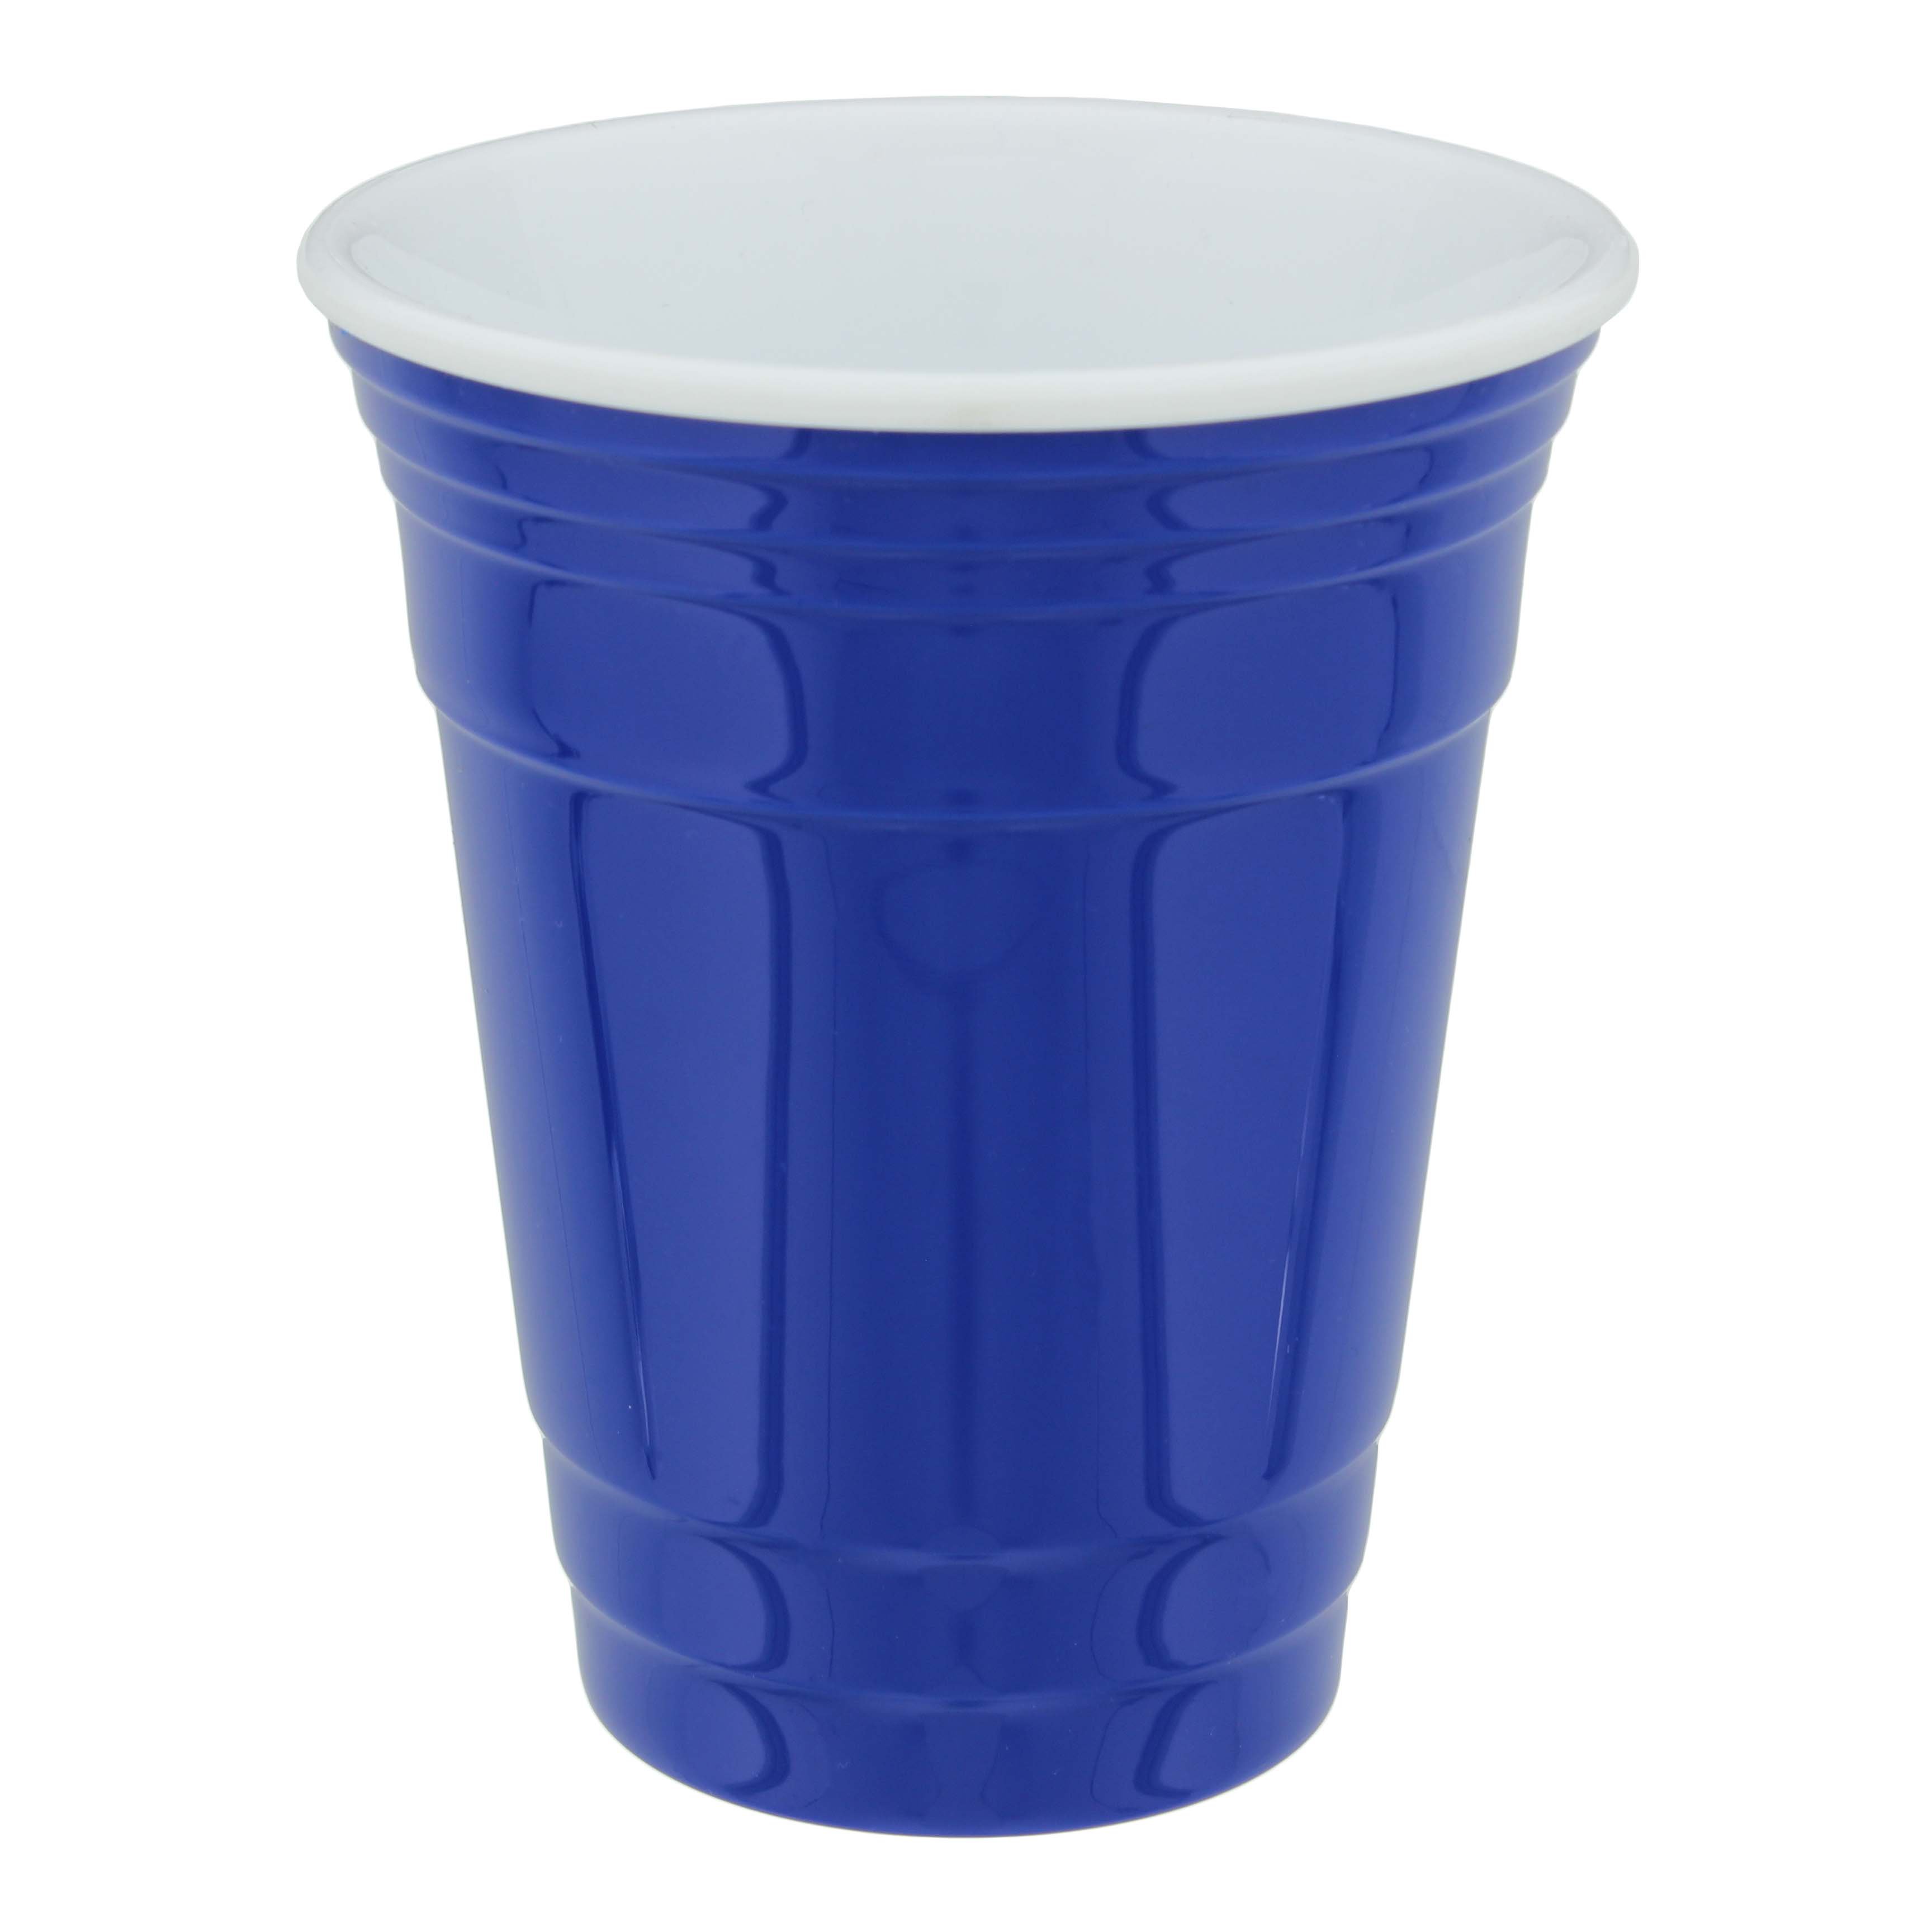 Hefty Party On! 16 oz Assorted Colors Disposable Plastic Cups - Shop  Drinkware at H-E-B